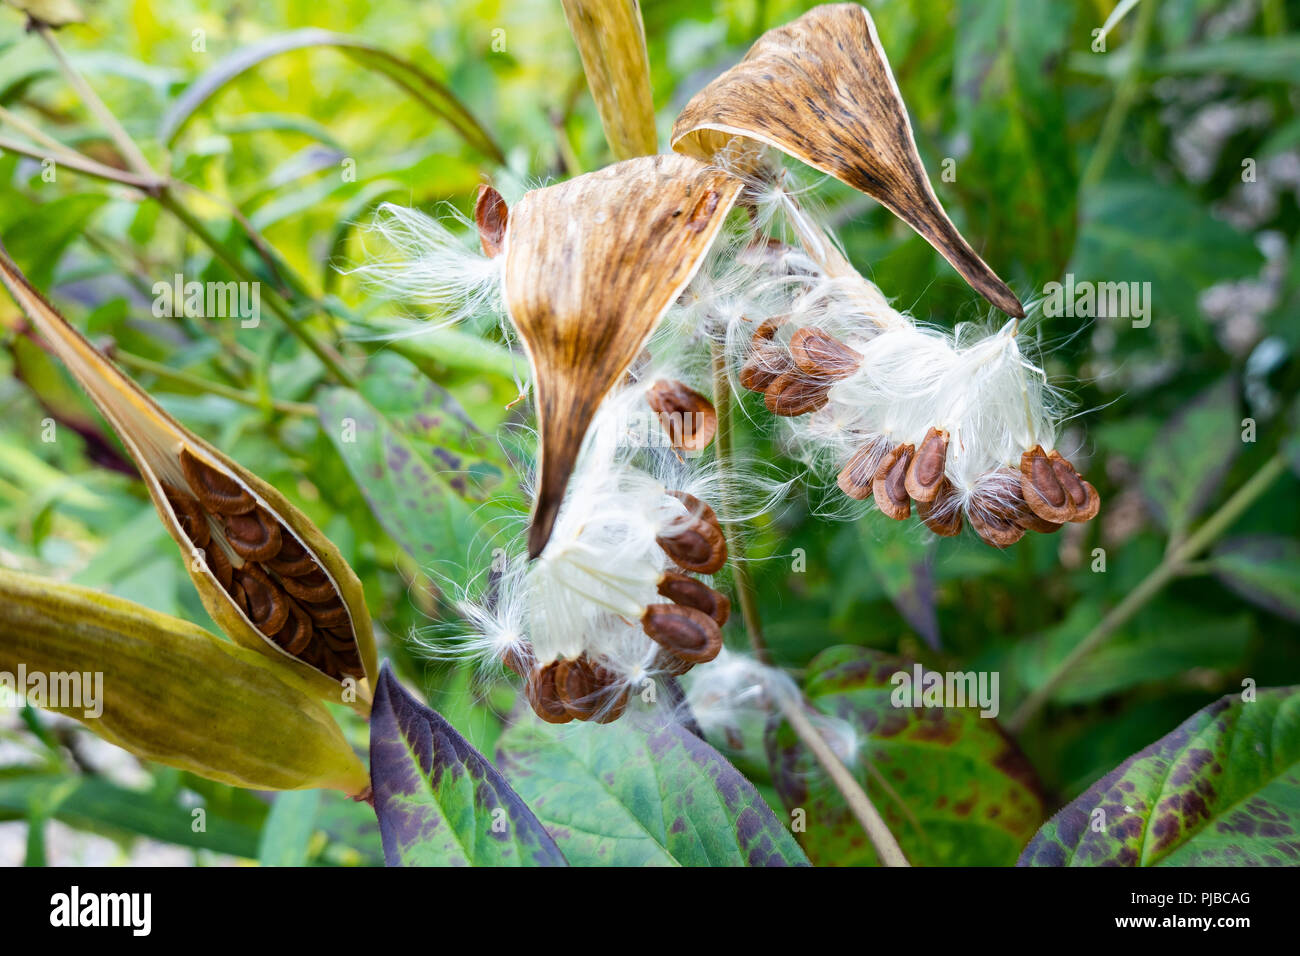 Opening seed pods on a swamp milkweed plant, Asclepias incarnata, in a garden in Speculator, NY USA with the seeds dispersing to form new plants. Stock Photo